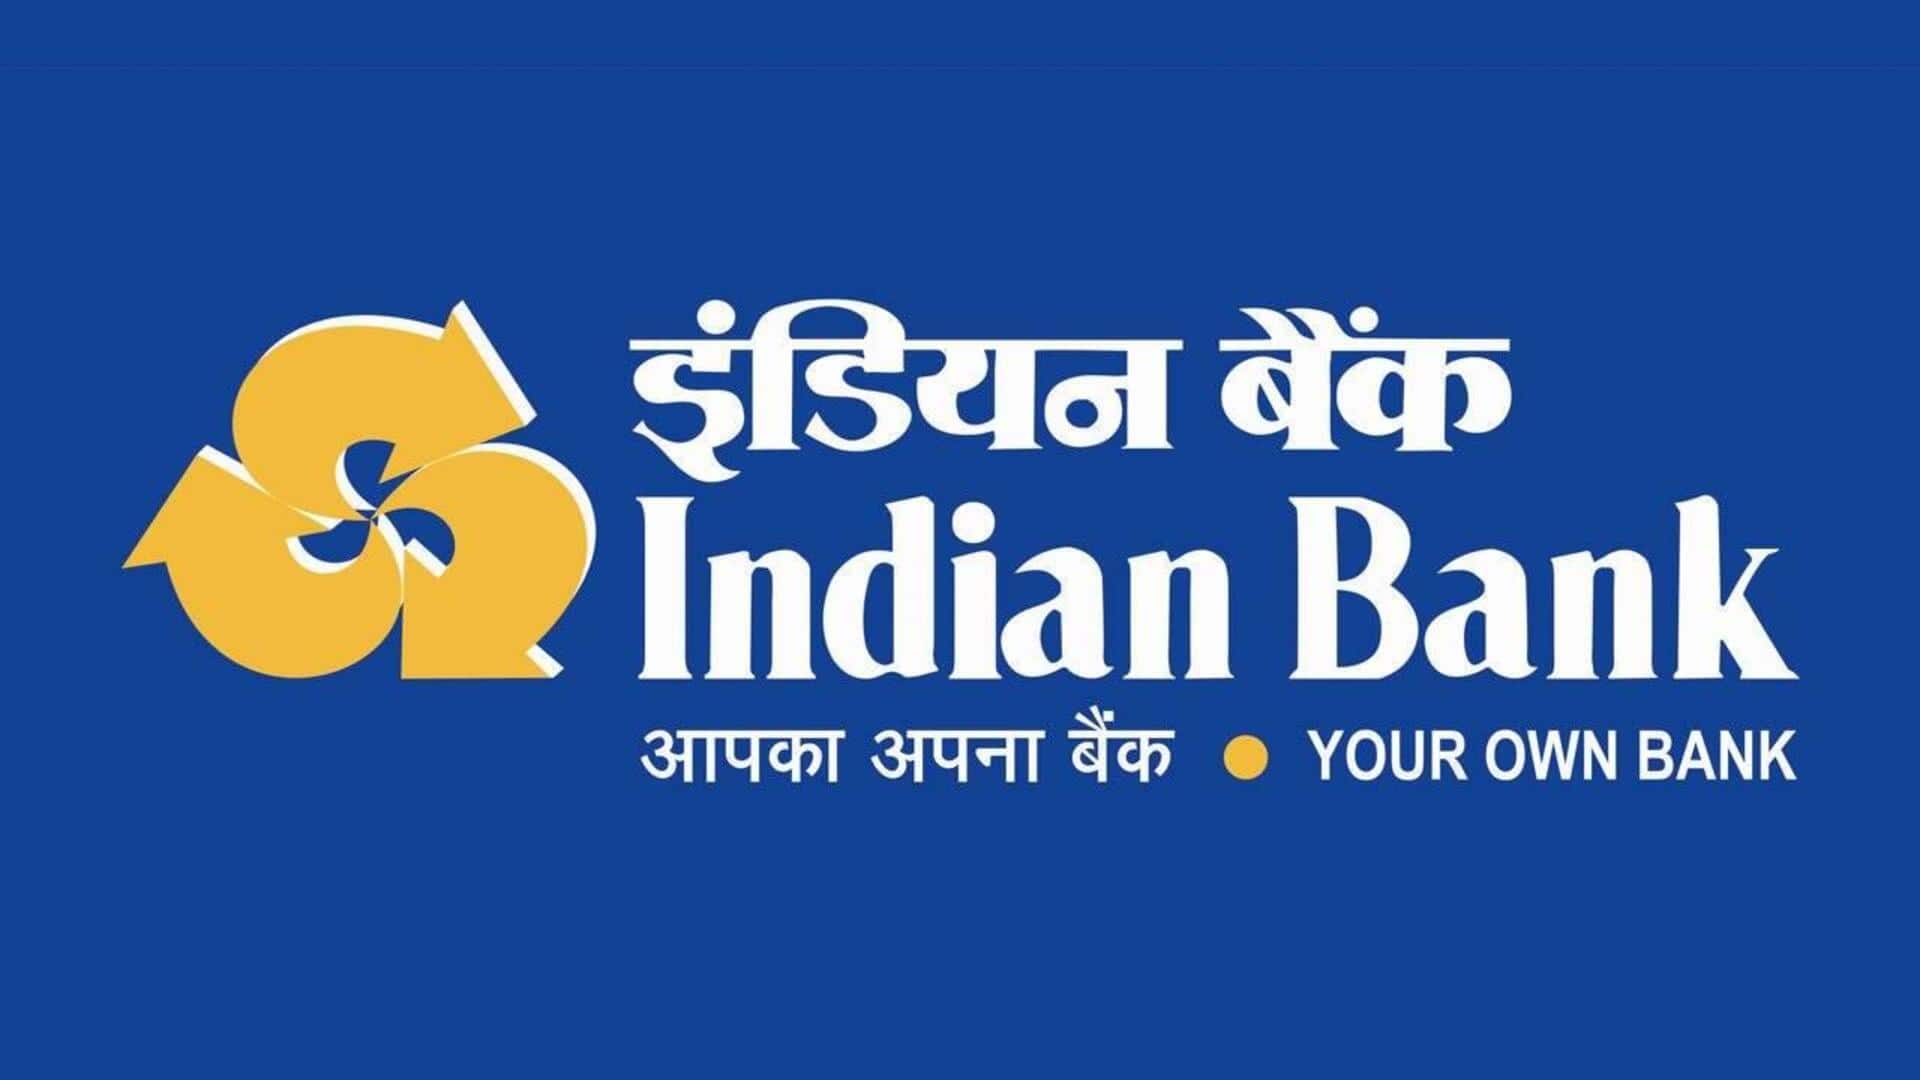 Indian Bank's wholly-owned subsidiary will ensure on-ground money collection, recovery